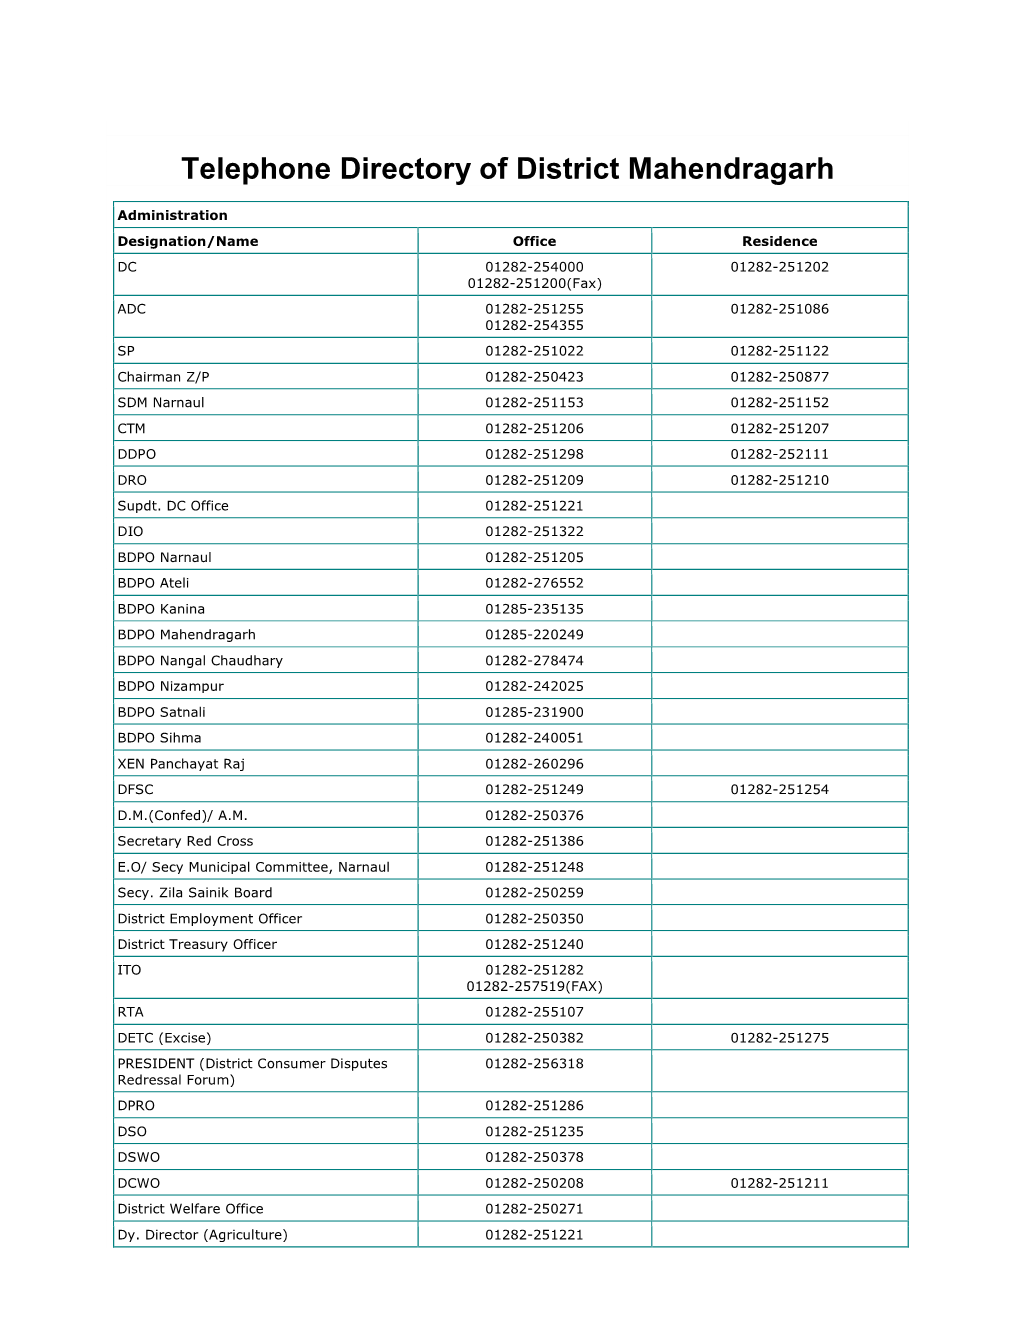 Telephone Directory of District Mahendragarh